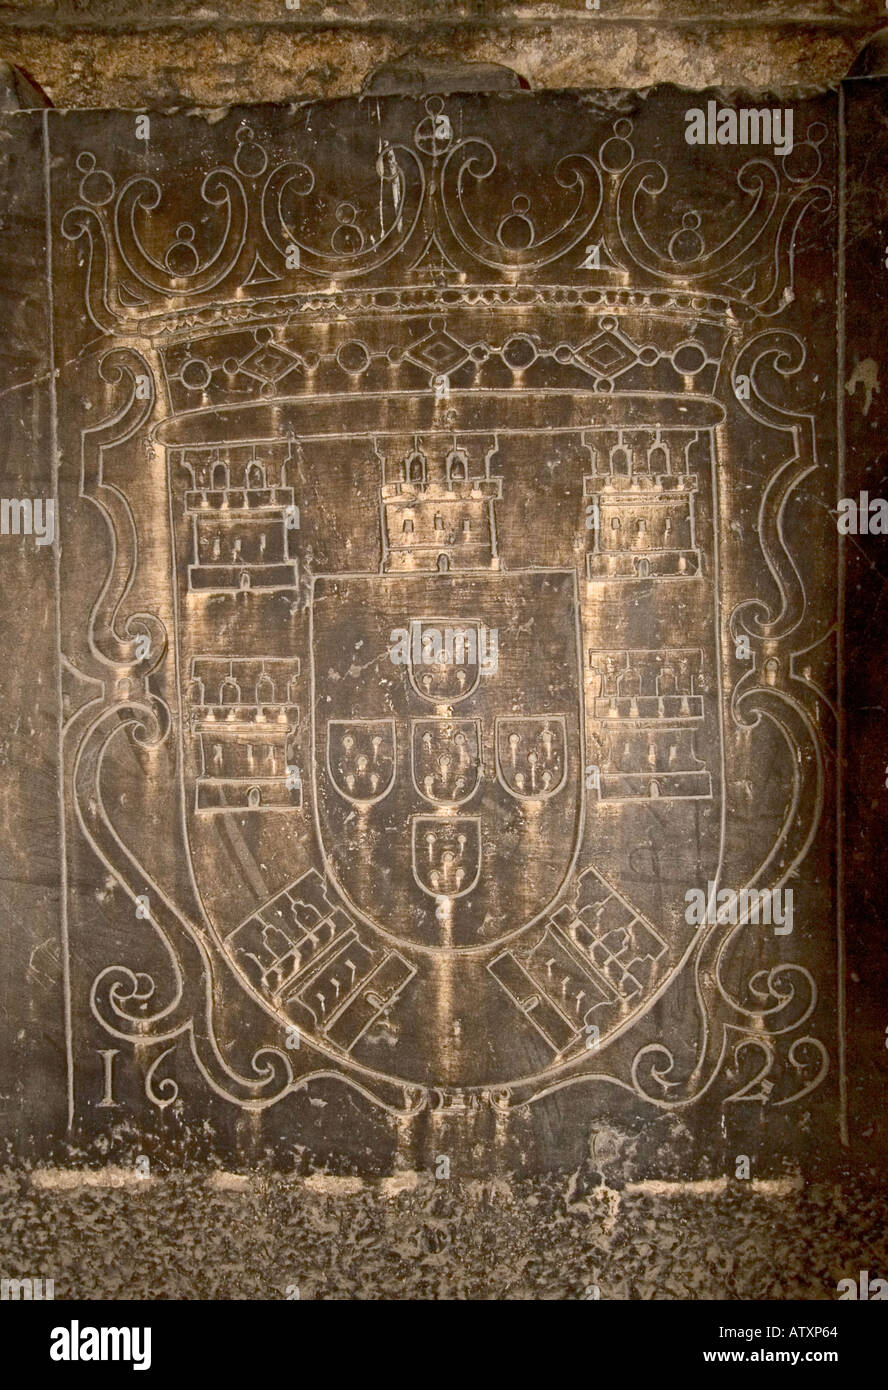 Very old royal coat of arms engraved outside tomb Inside the Sé Lisbon Stock Photo